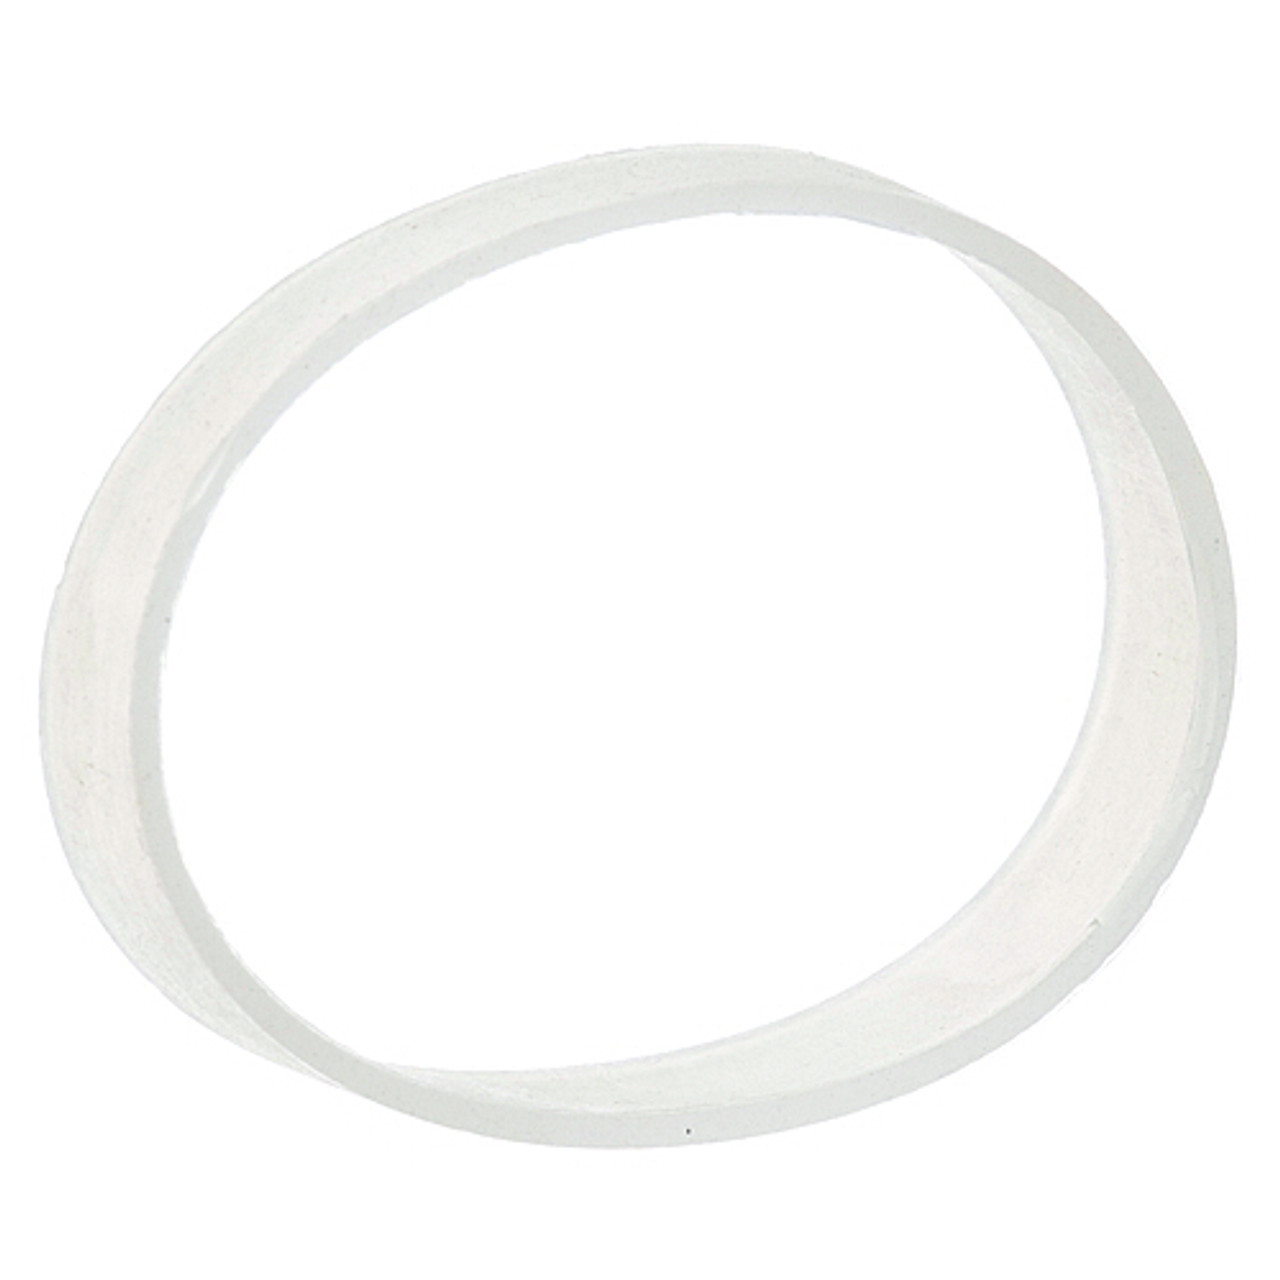 Gasket 2.5" D. X .5" Wide - Replacement Part For Blodgett 2I-70139